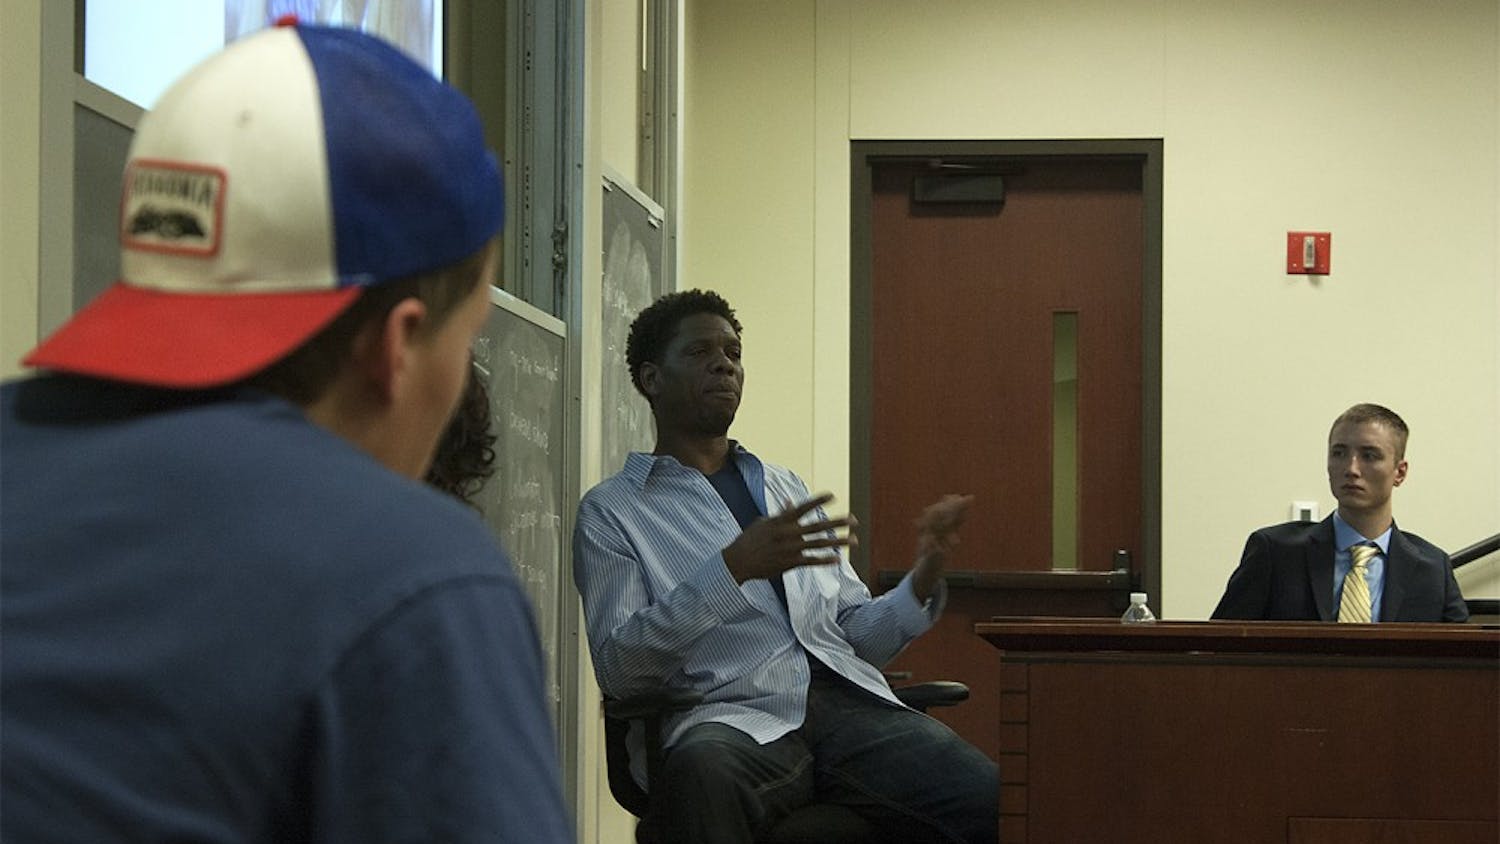 J.R. Reid, a former UNC-Chapel Hill basketball player, talks about his post-athletic career at a meeting of the Carolina Sports Business Club in the Kenan-Flagler Business School.